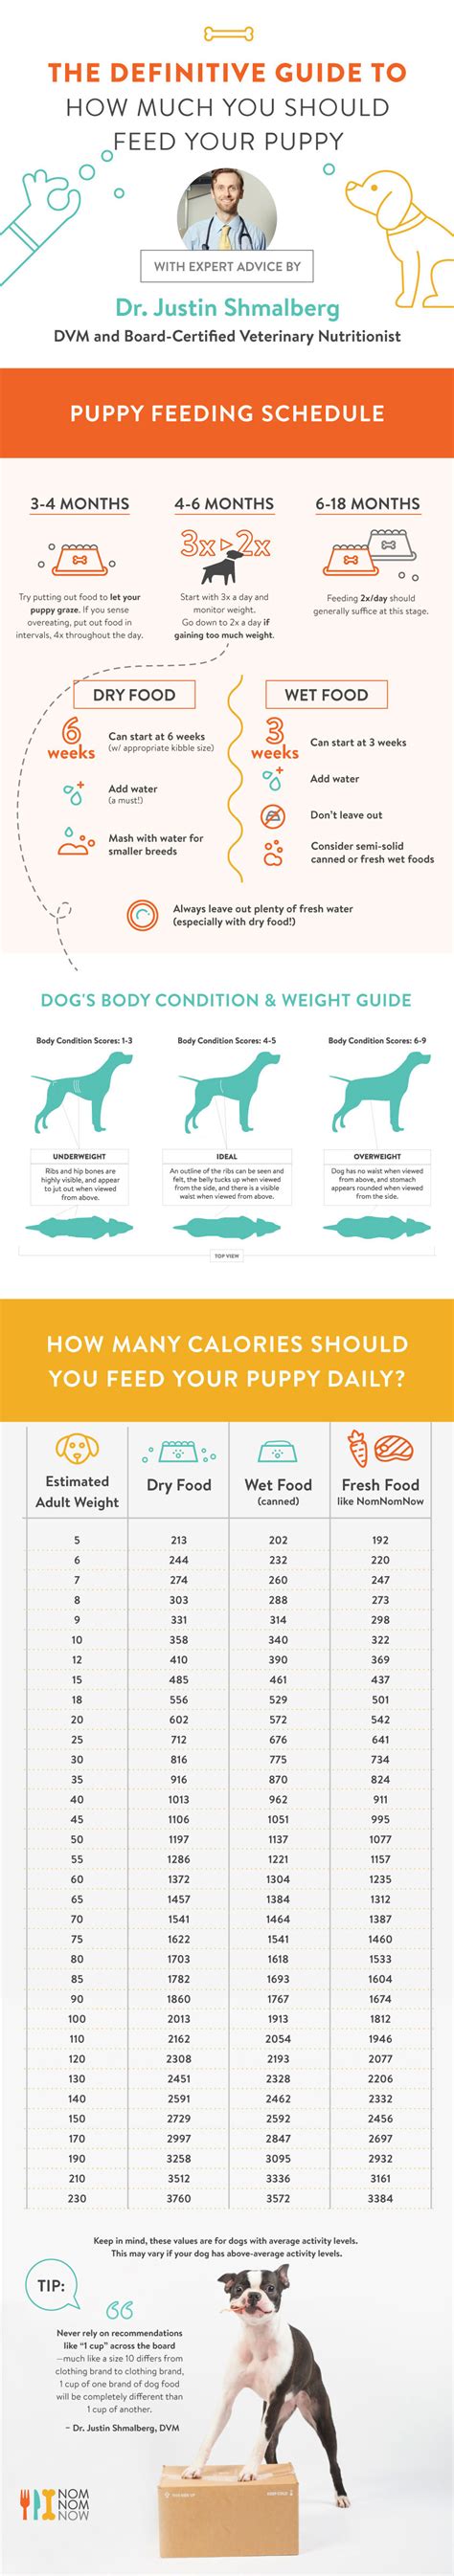 Is the best puppy food wet or dry? Nom Nom Now's Definitive Guide to Feeding Your Puppy ...